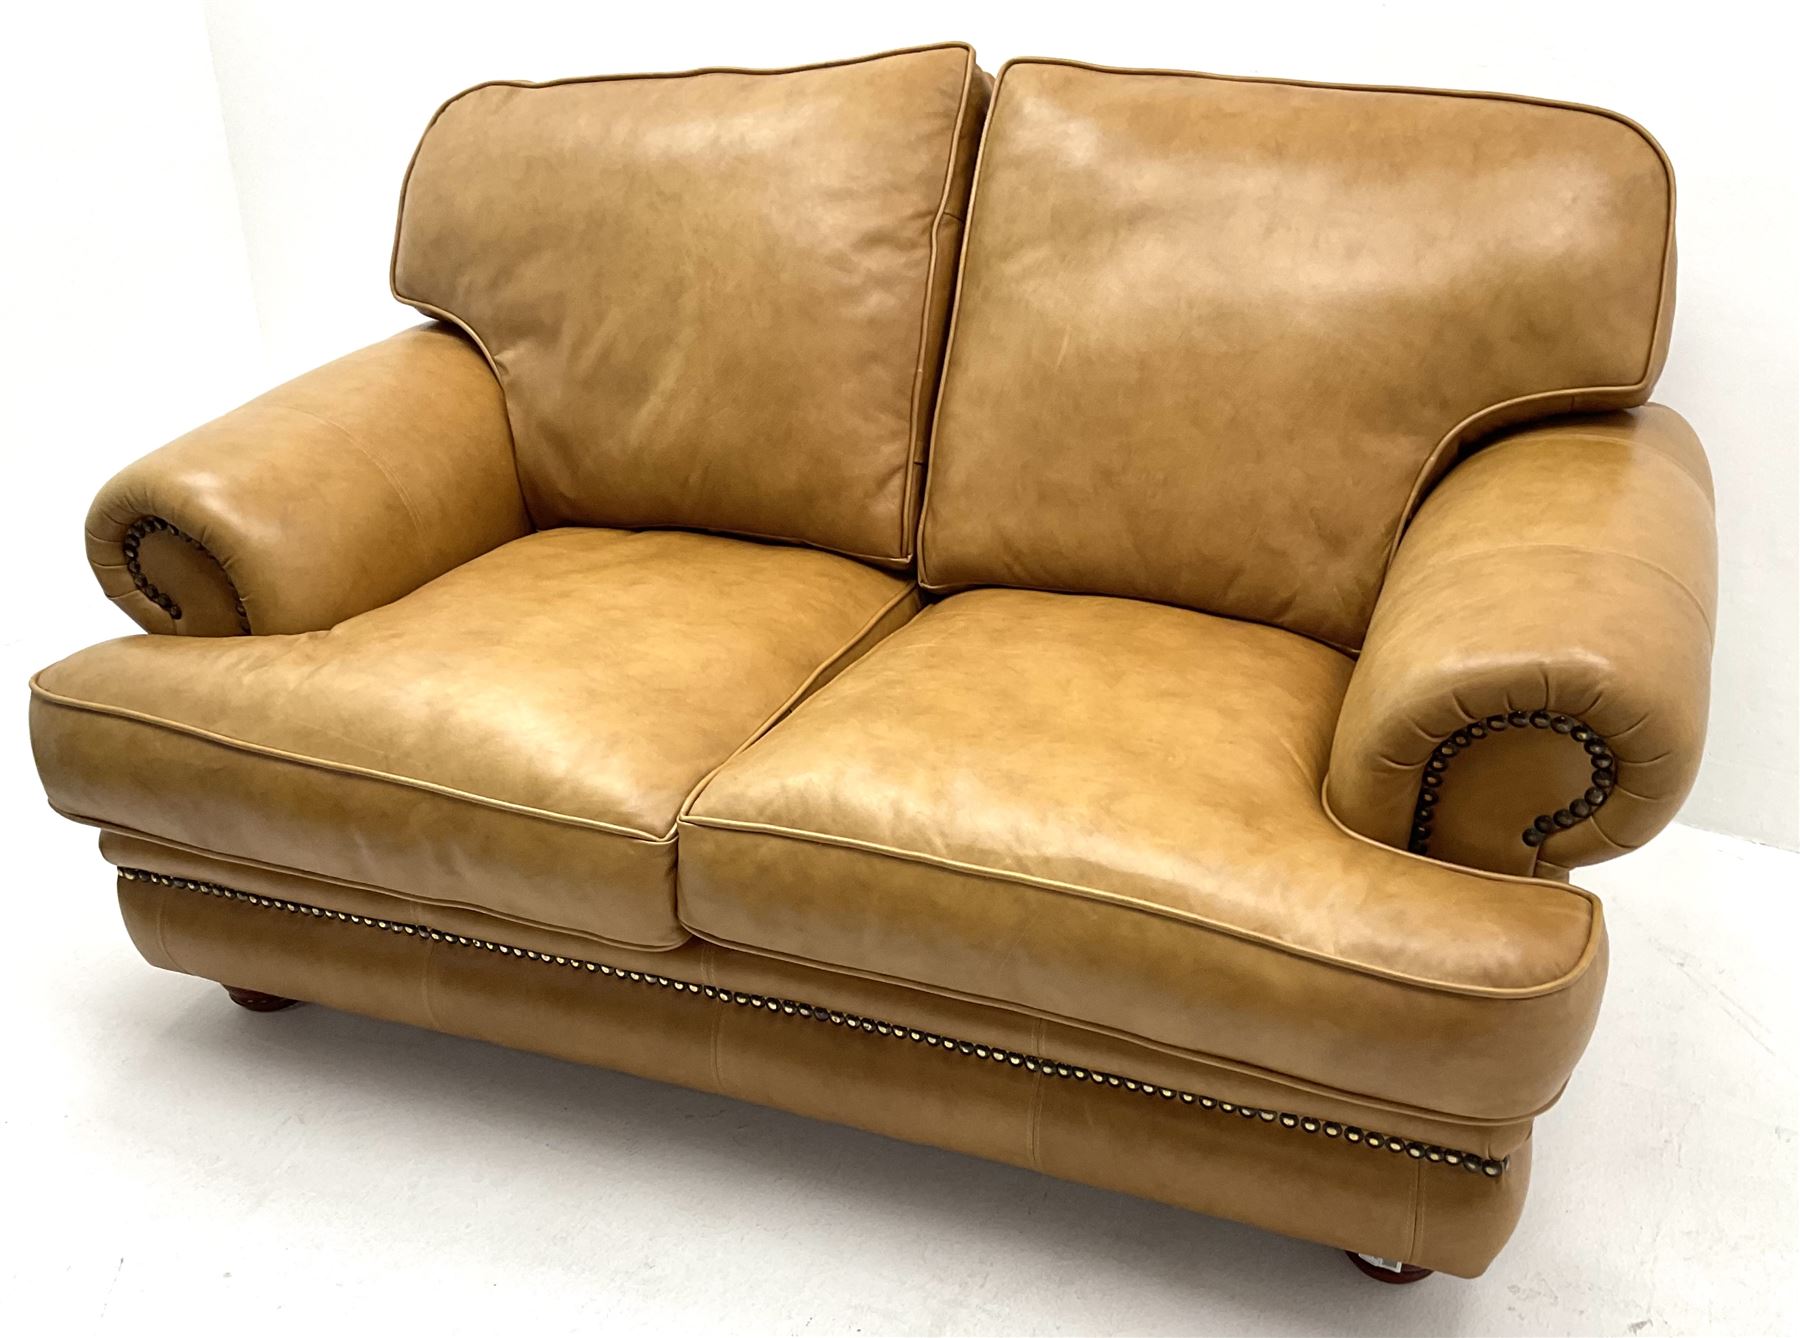 Two seat sofa upholstered in a studded tan leather - Image 3 of 7